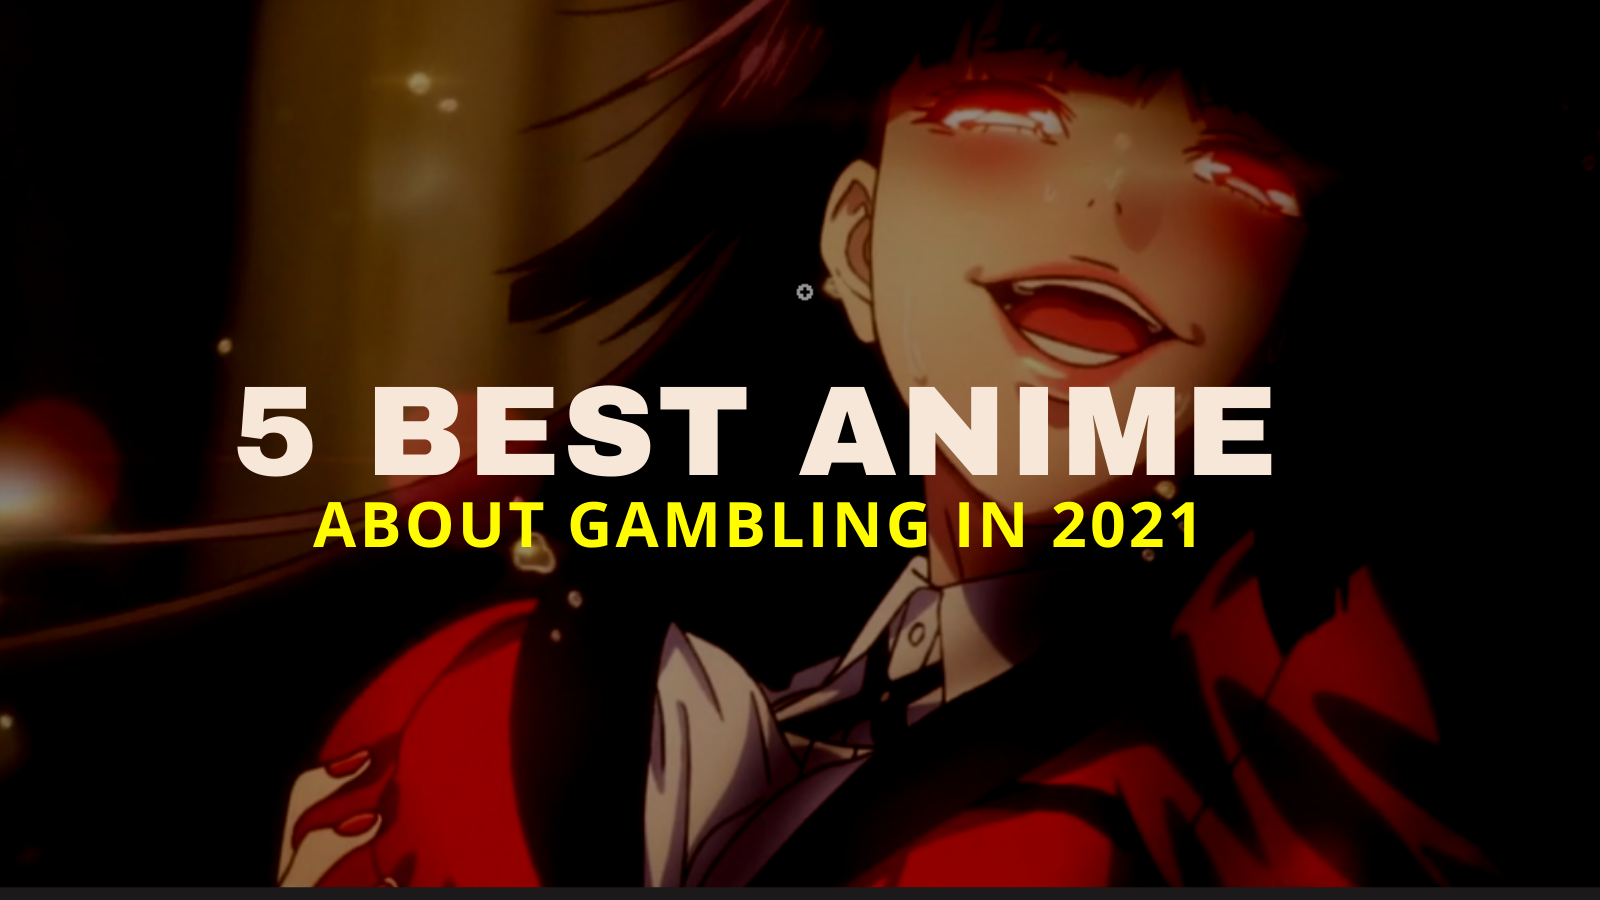 Read more about the article 5 Best Anime About Gambling That You Must Watch in 2021<div class="yasr-vv-stars-title-container"><div class='yasr-stars-title yasr-rater-stars'
                          id='yasr-visitor-votes-readonly-rater-58a3b670f6e0f'
                          data-rating='0'
                          data-rater-starsize='16'
                          data-rater-postid='2654'
                          data-rater-readonly='true'
                          data-readonly-attribute='true'
                      ></div><span class='yasr-stars-title-average'>0 (0)</span></div>